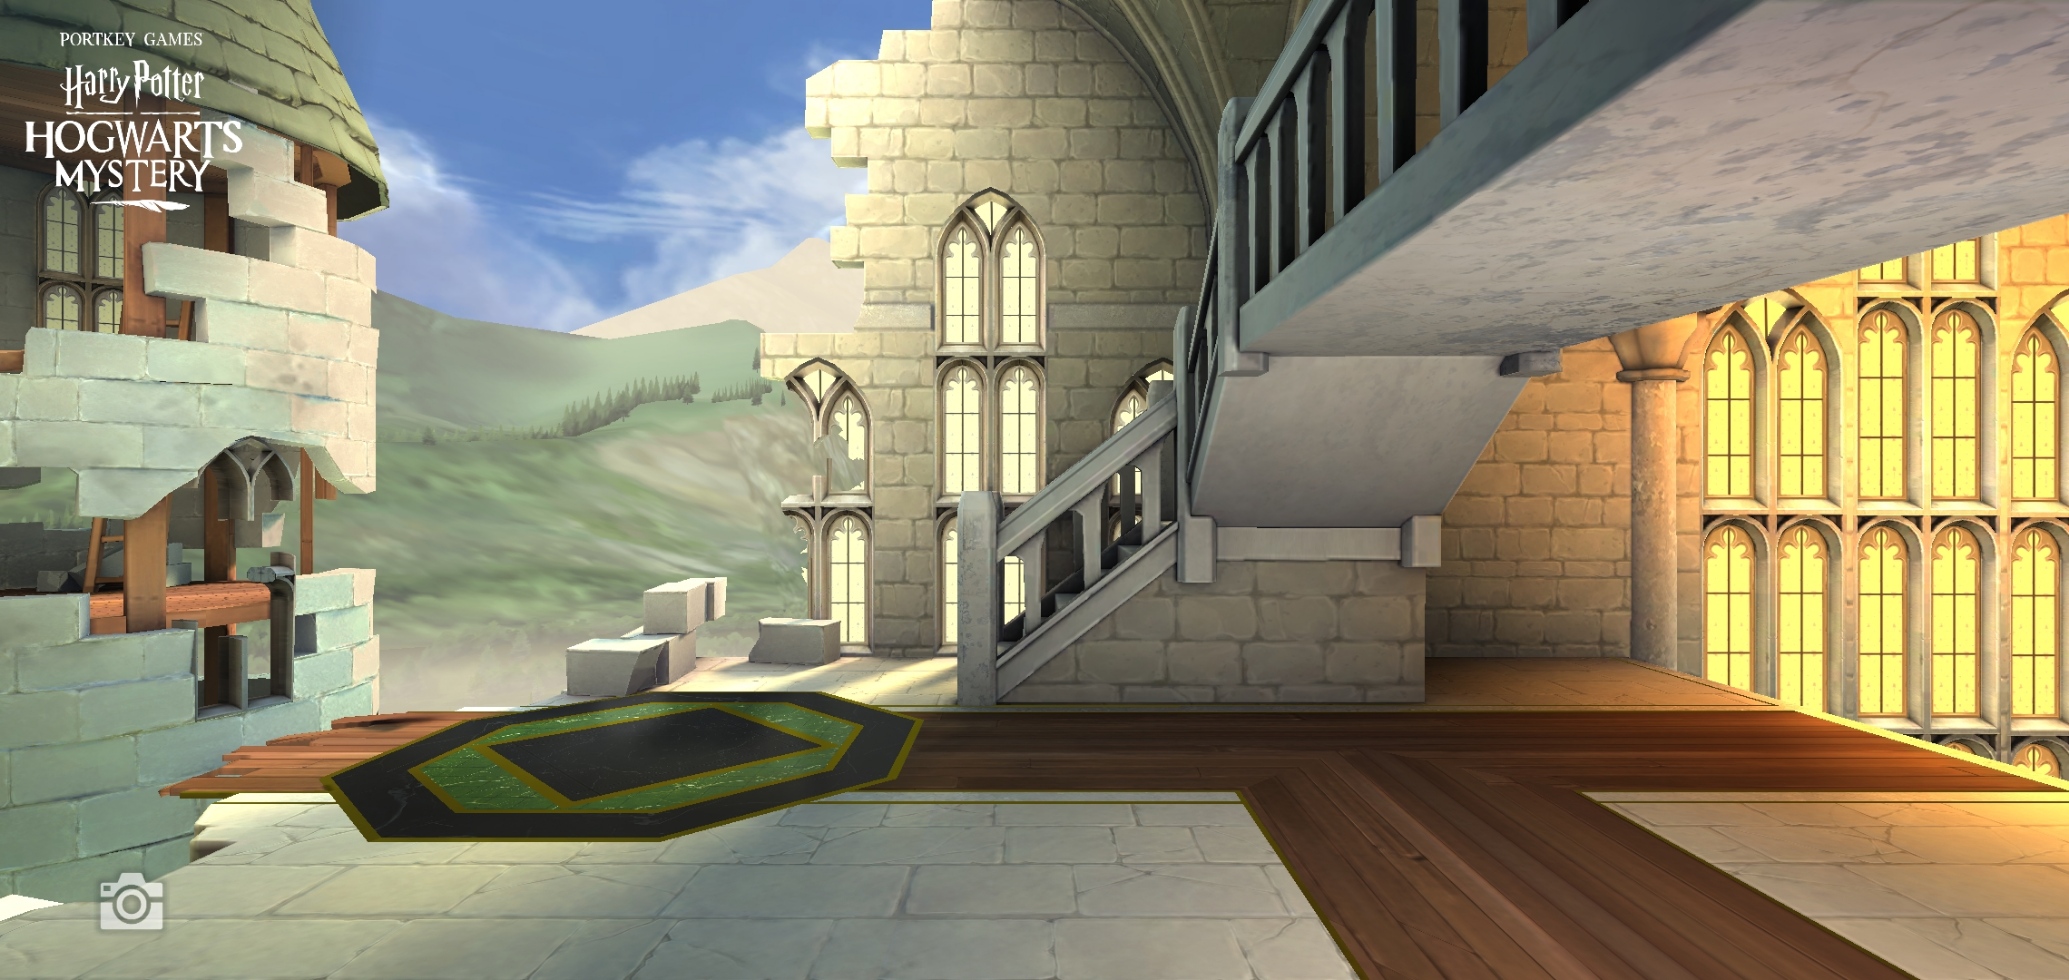 Pictured is a view of the Dragon Clubhouse in “Hogwarts Mystery”.